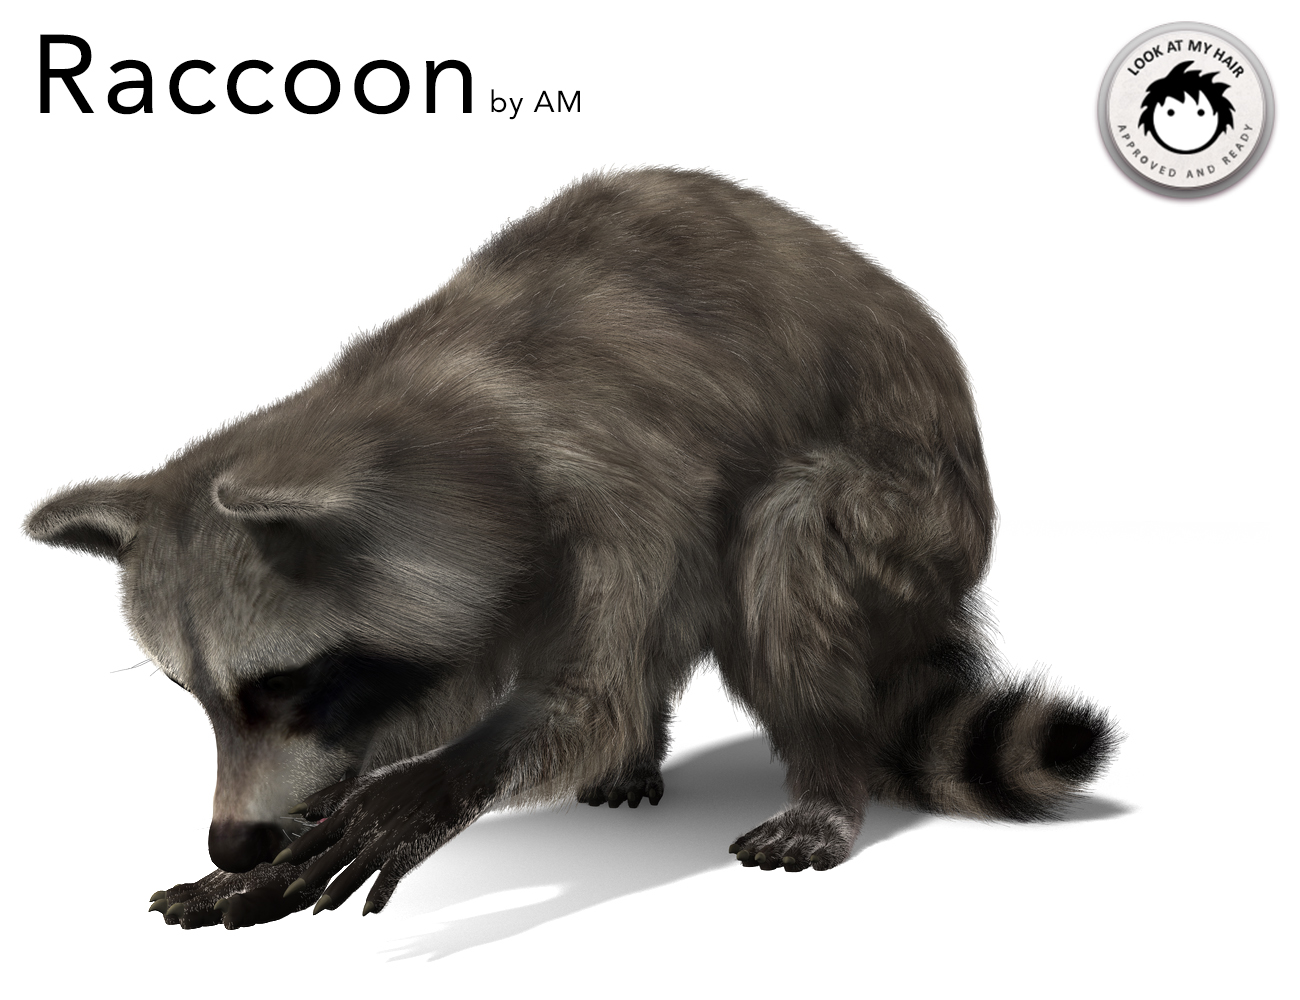 Raccoon by AM by: Alessandro_AM, 3D Models by Daz 3D